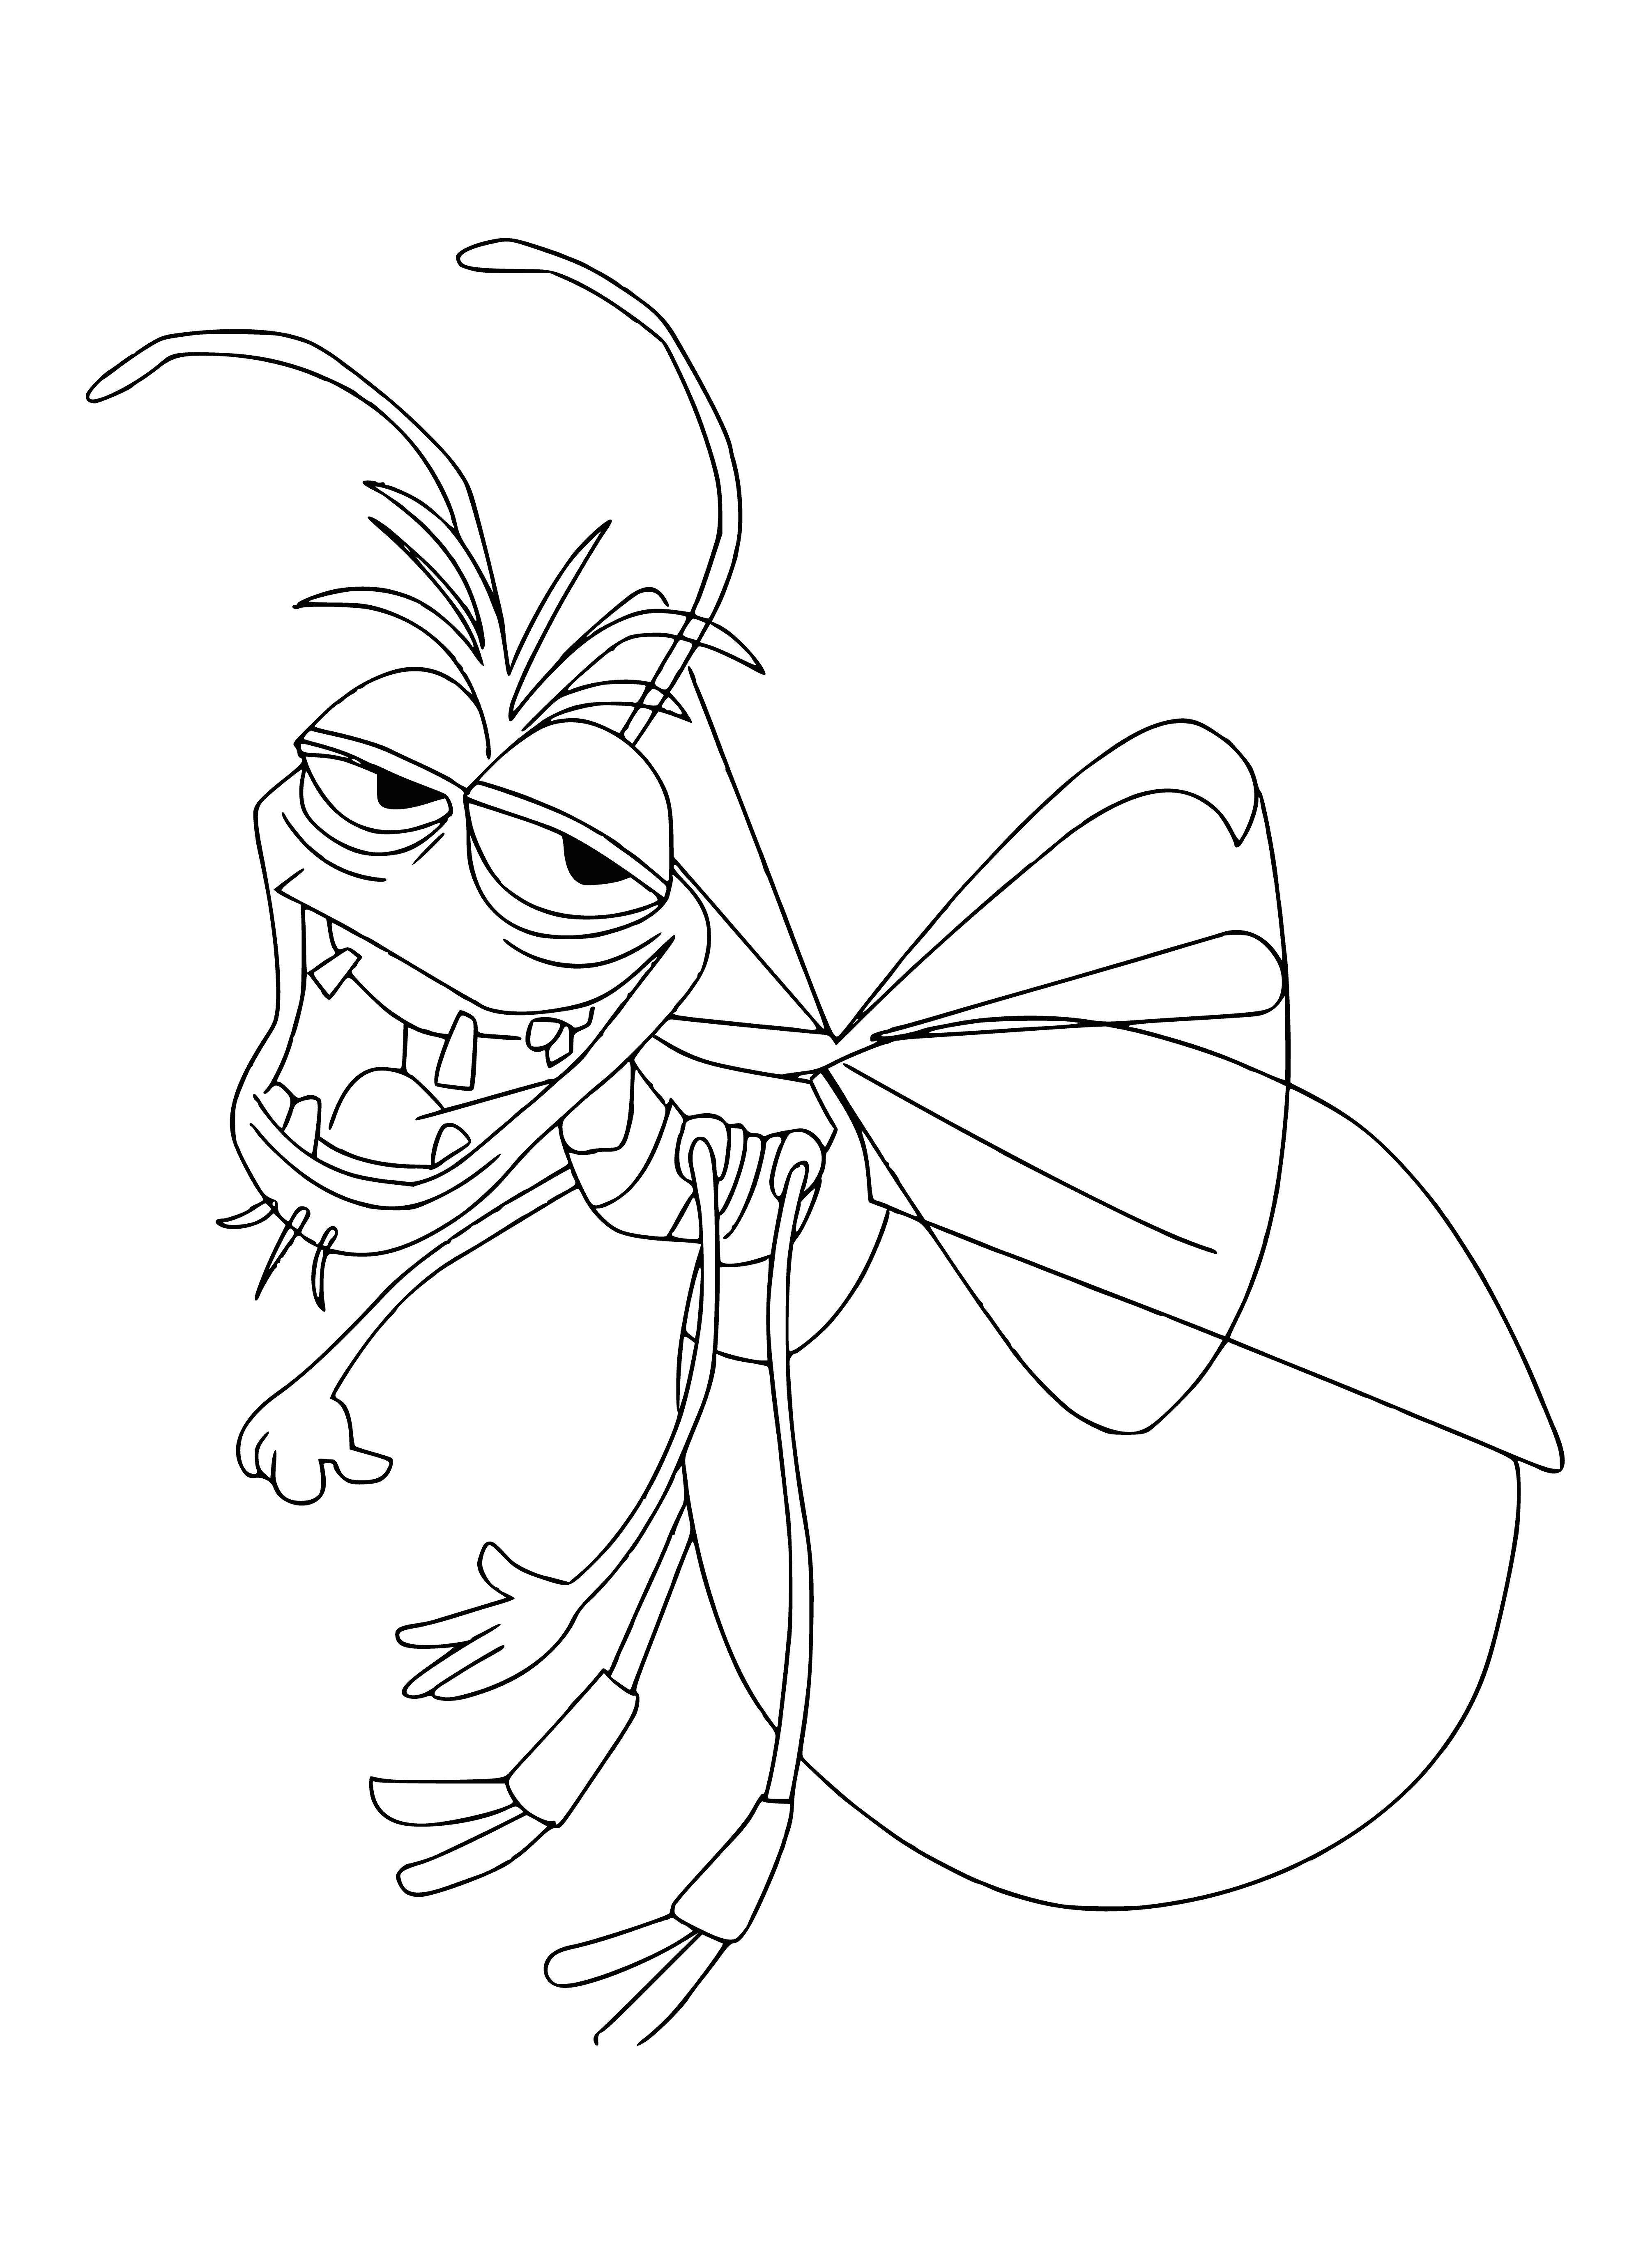 coloring page: The firefly ray is a yellow-green creature with long, flowing tentacles and four eyes. It's surrounded by a cloud of fireflies as it flies through the air.